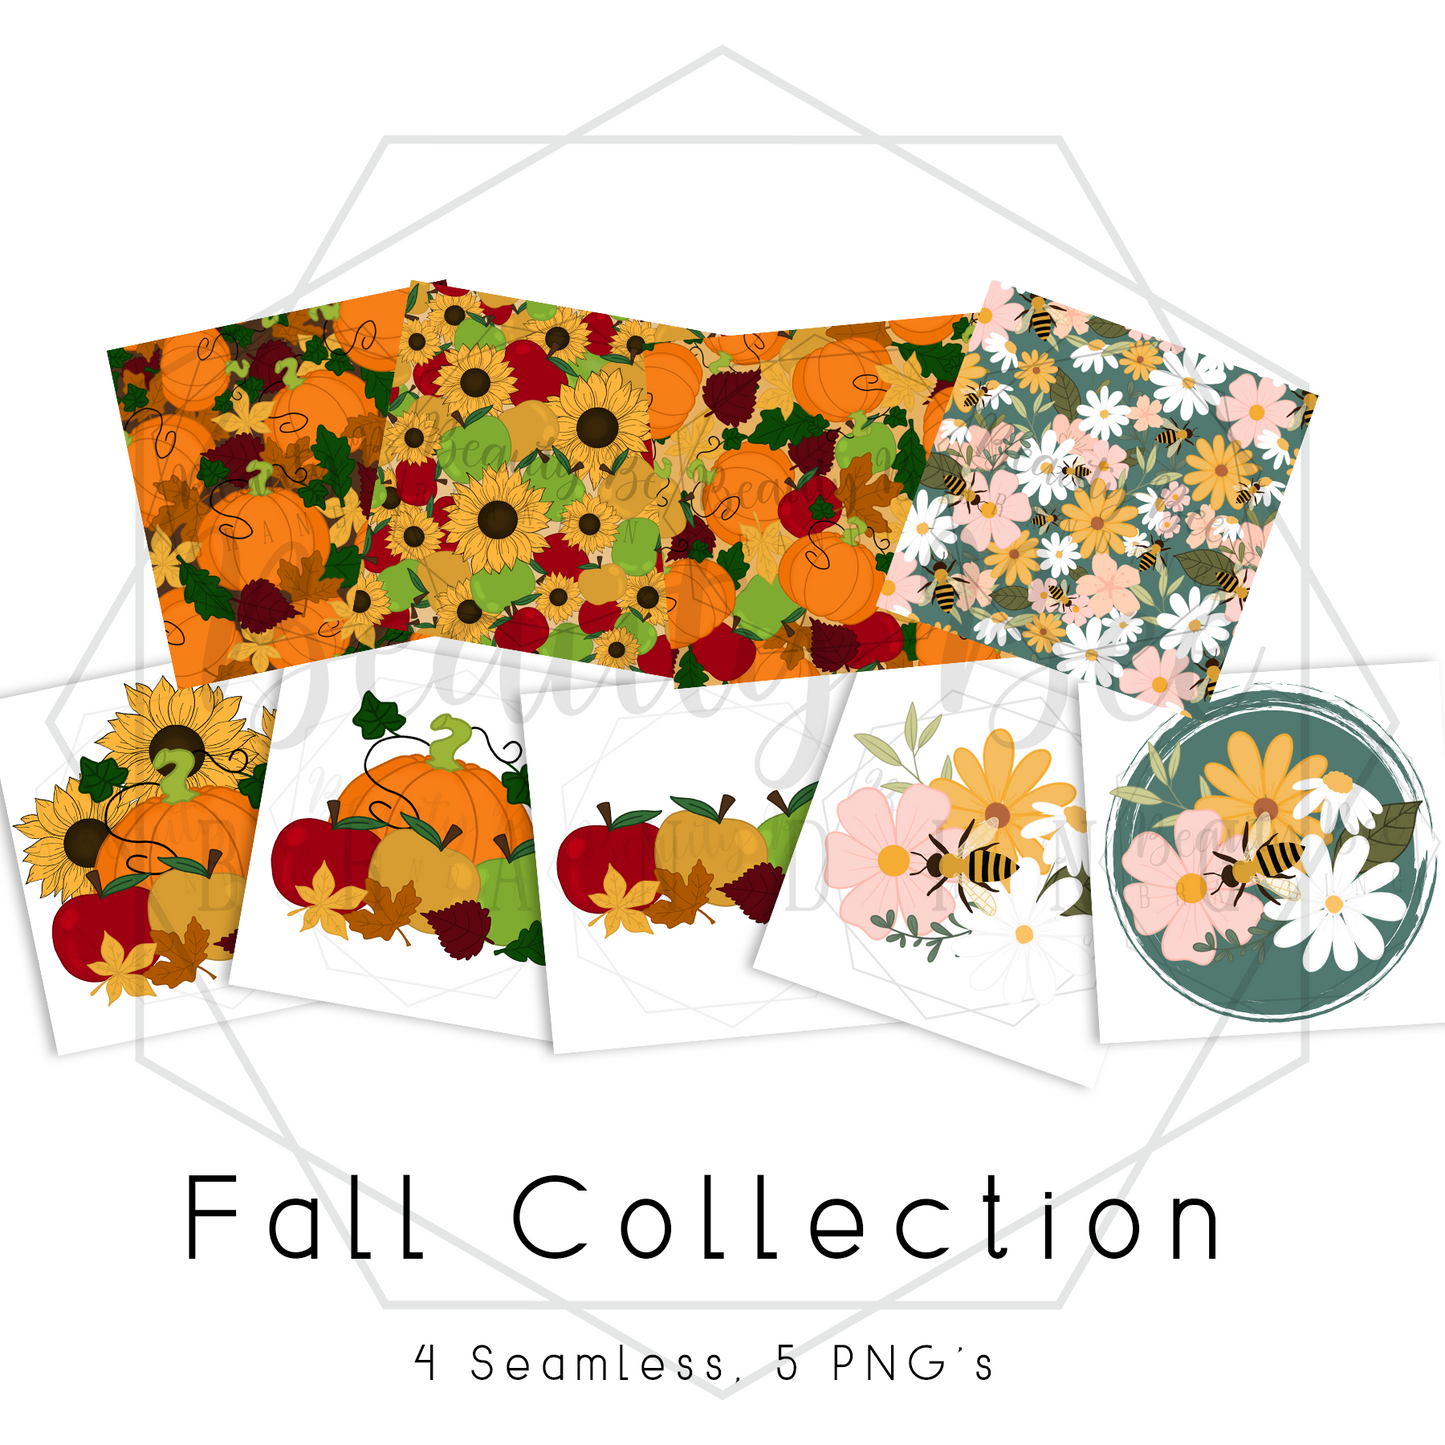 LIMITED Fall Collection MEGA BUNDLE SEAMLESS PATTERNS